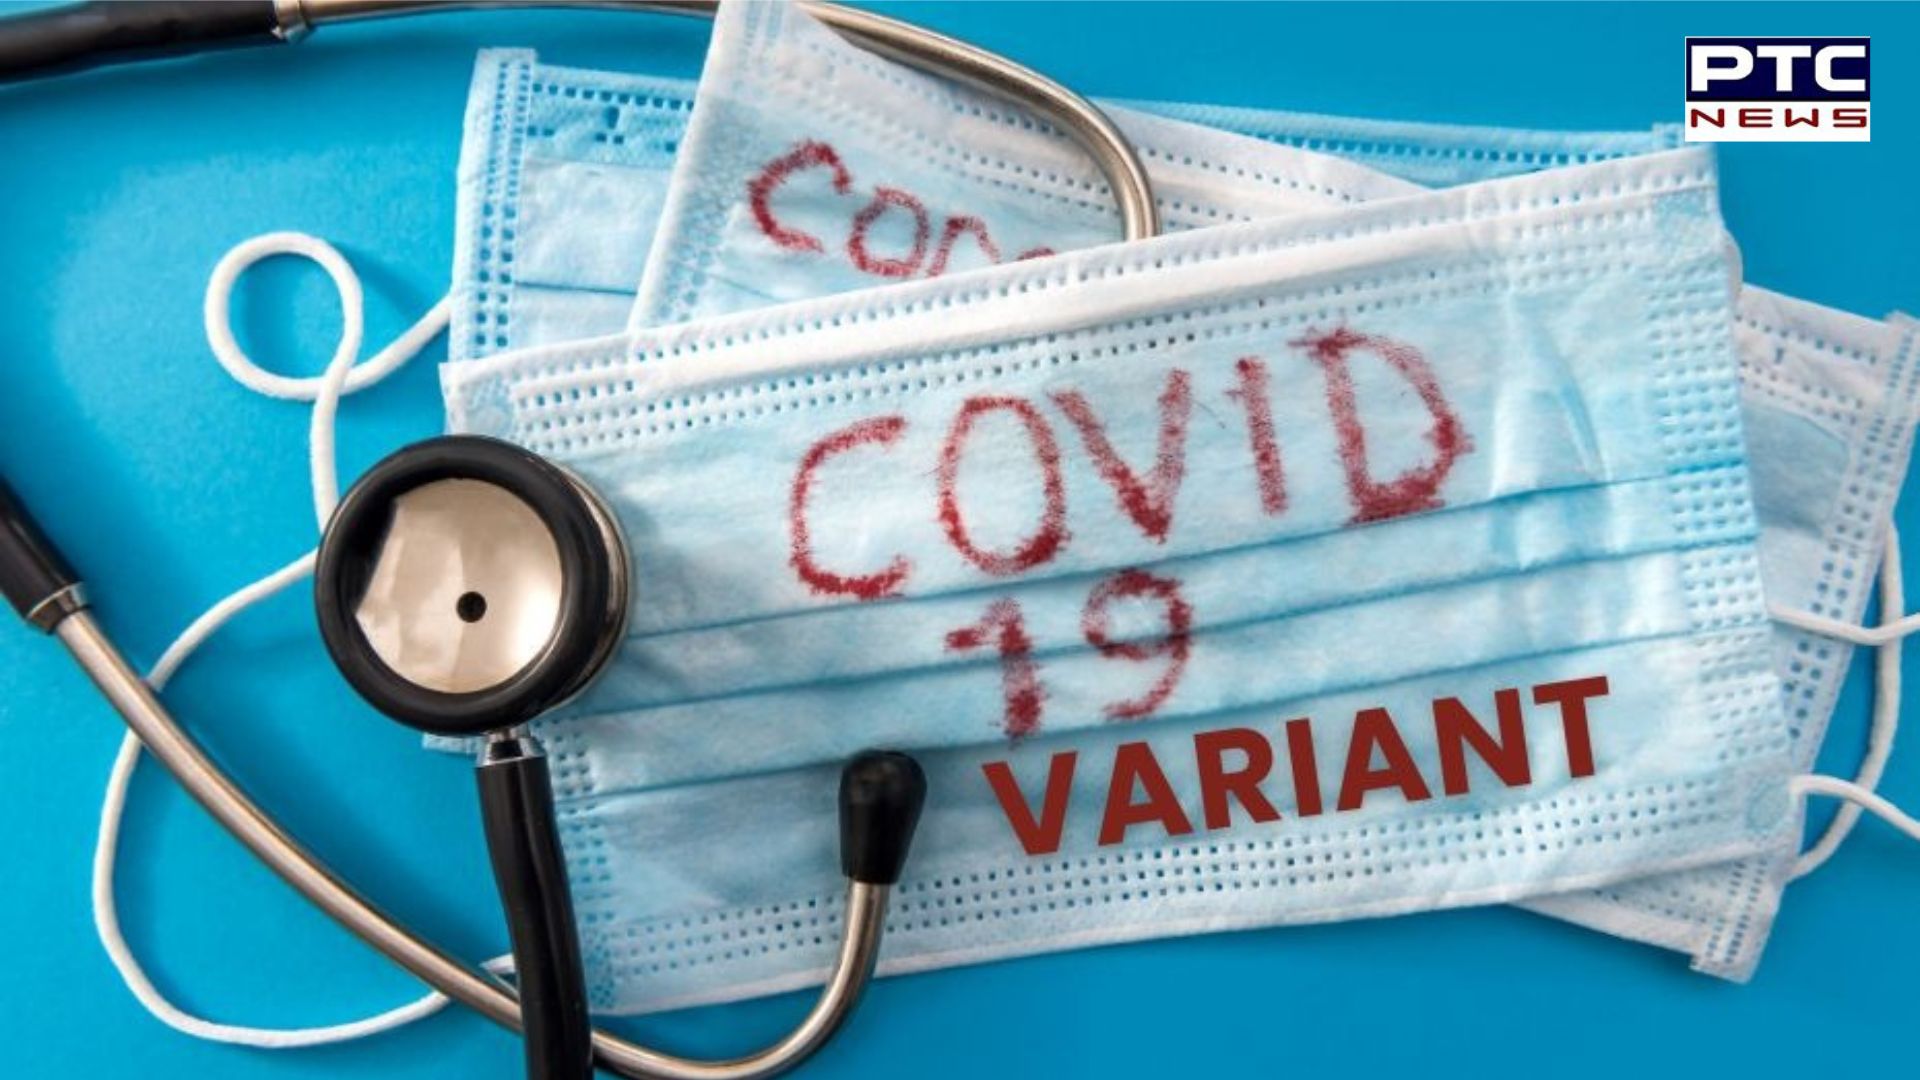 Covid JN 1 variant: Panic over surge in cases; check symptoms